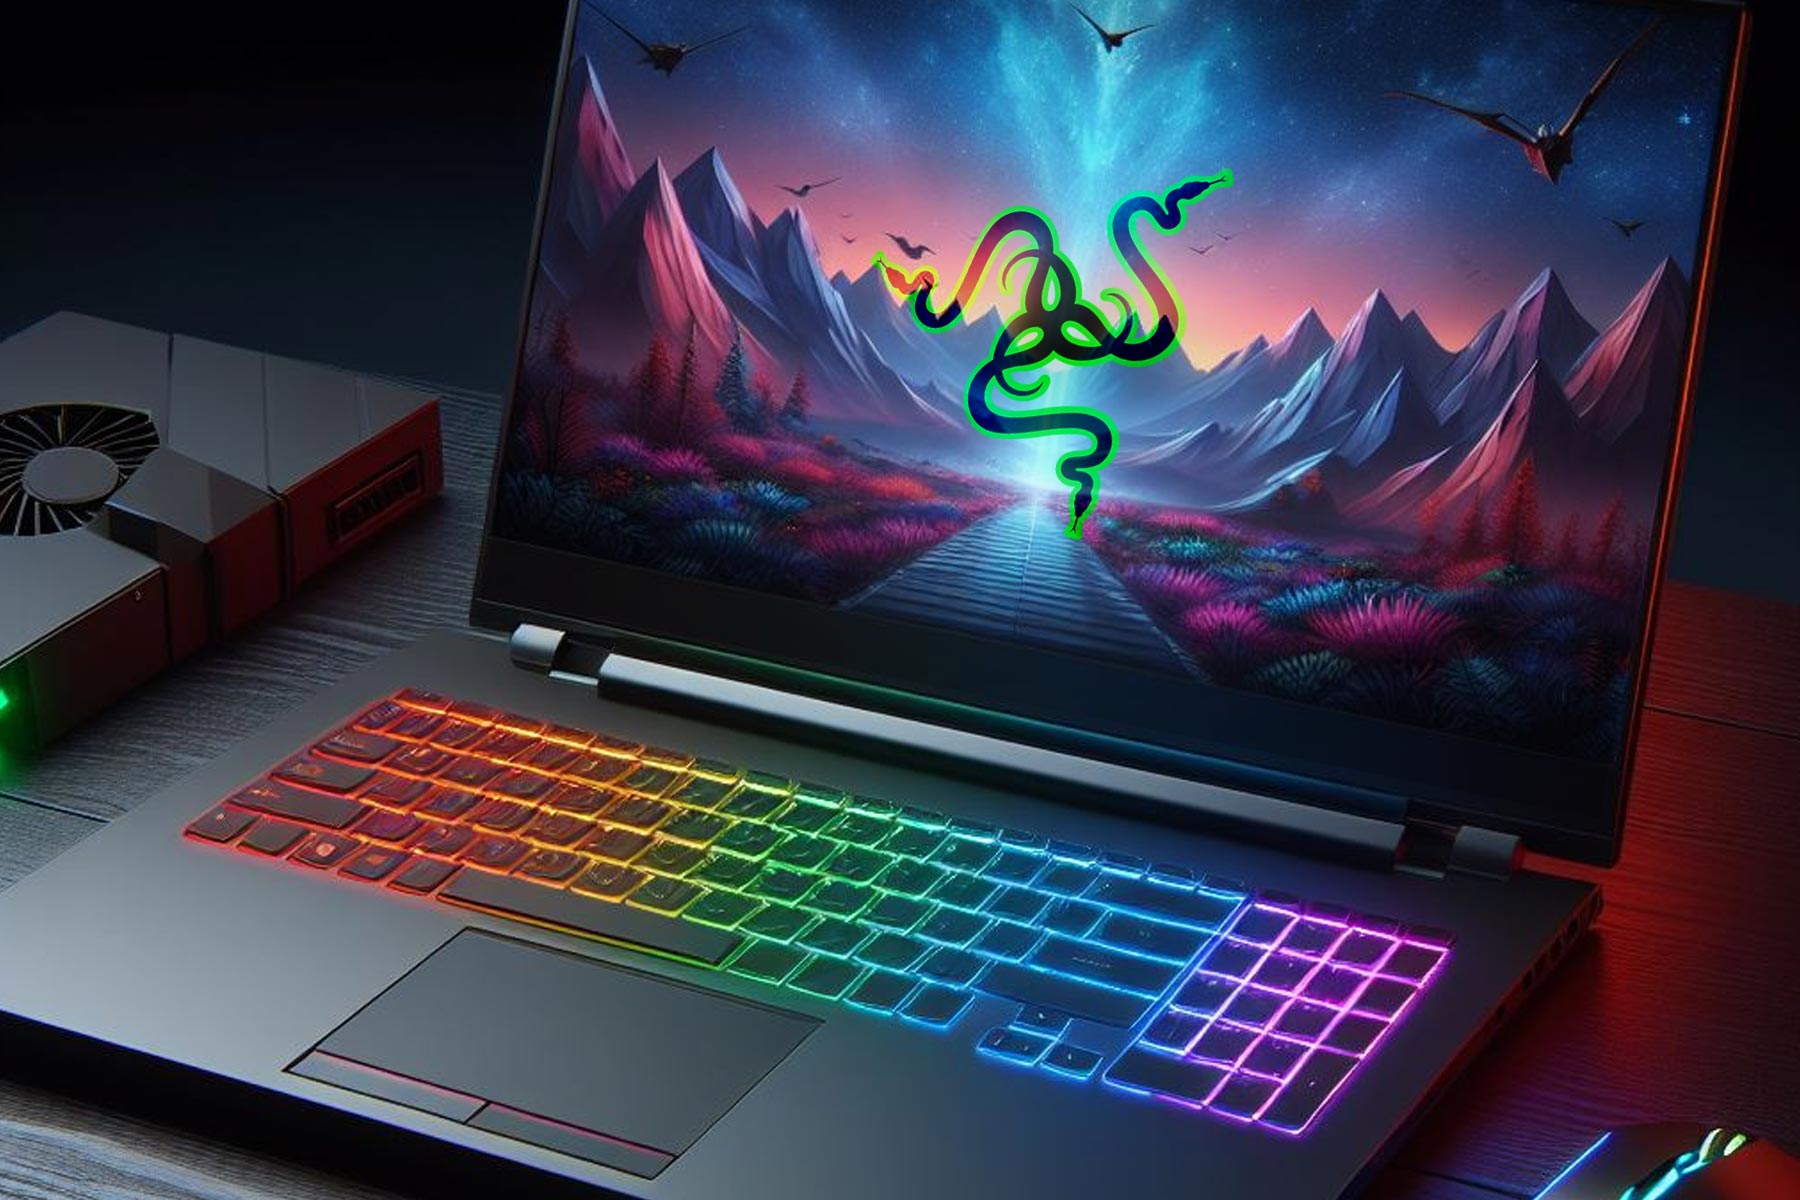 Here’s what NOT to do when updating a Razer Blade’s firmware